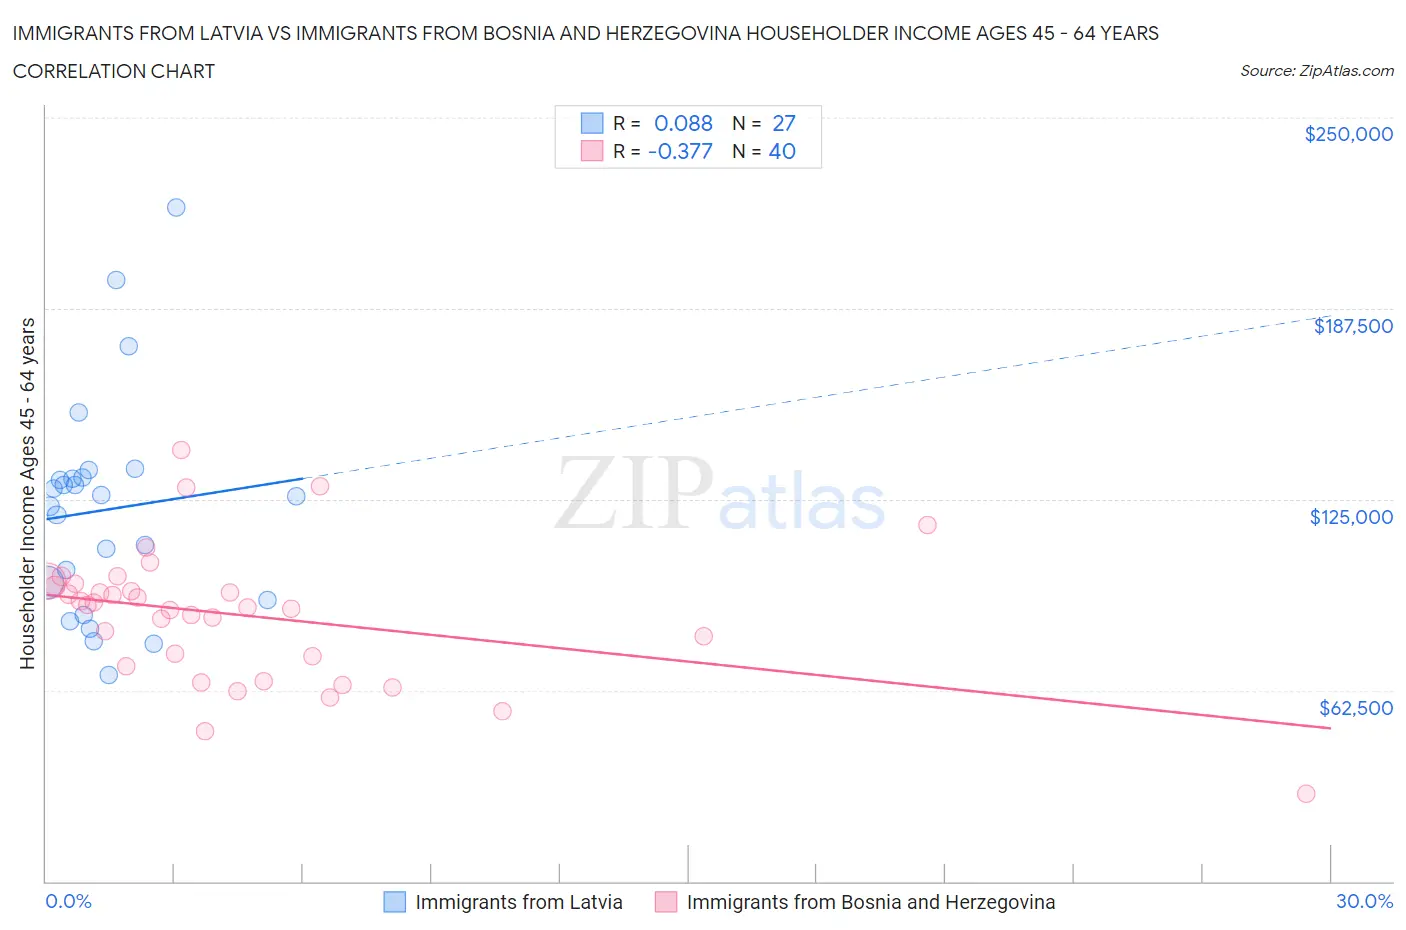 Immigrants from Latvia vs Immigrants from Bosnia and Herzegovina Householder Income Ages 45 - 64 years